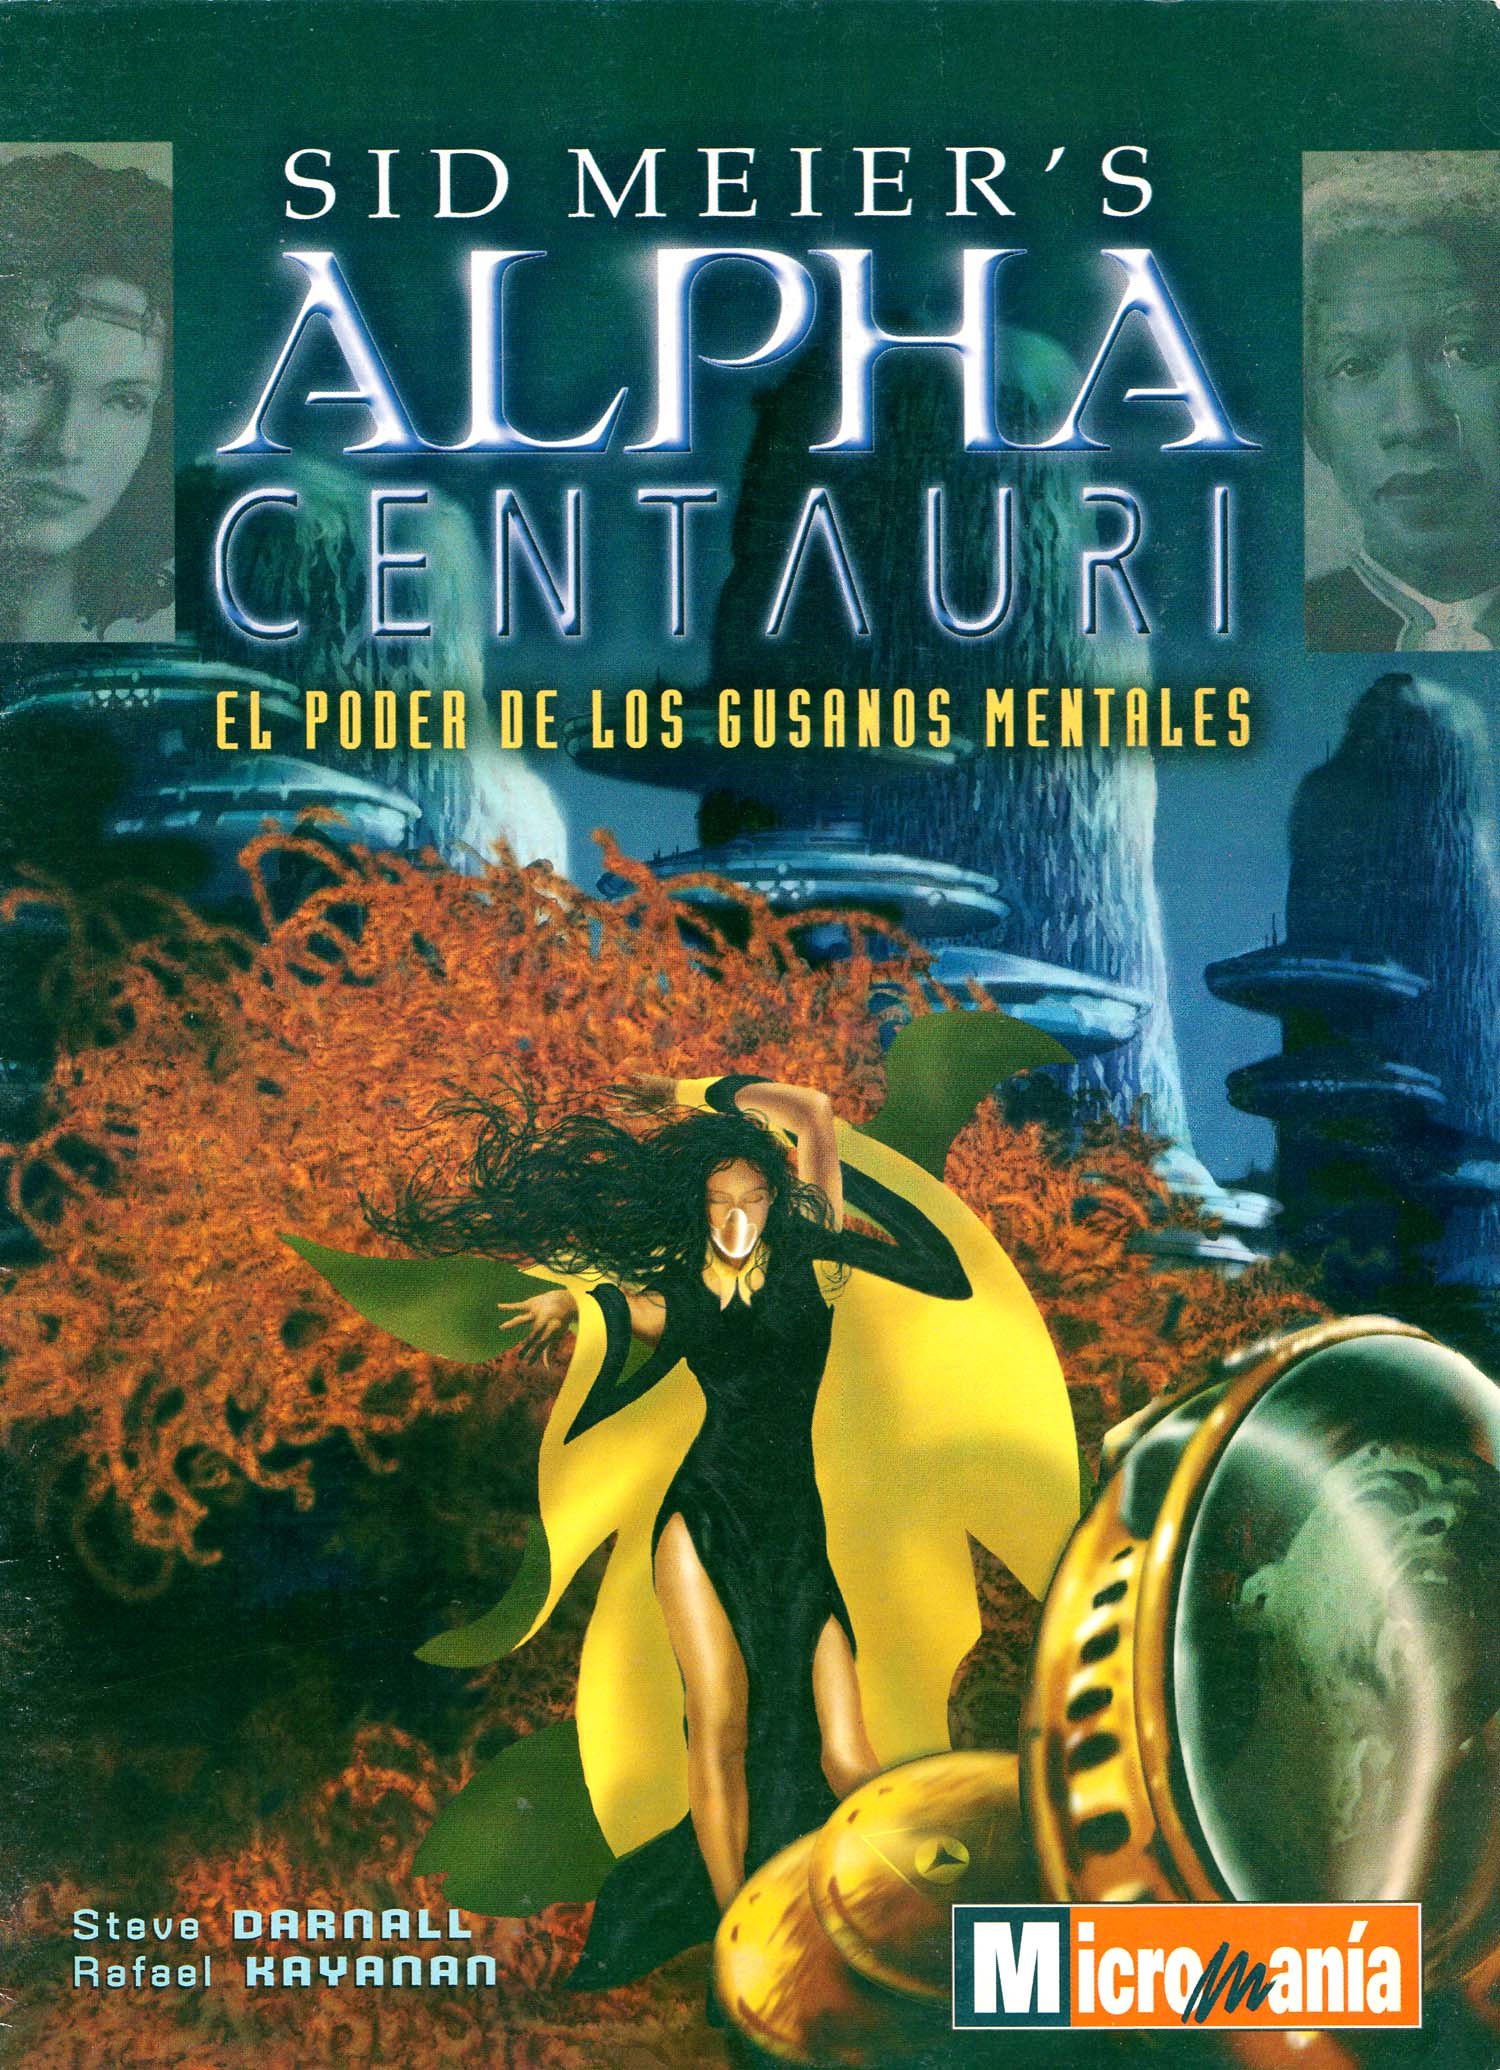 Read online Sid Meier's Alpha Centauri: Power of the Mind Worms comic -  Issue # Full - 1